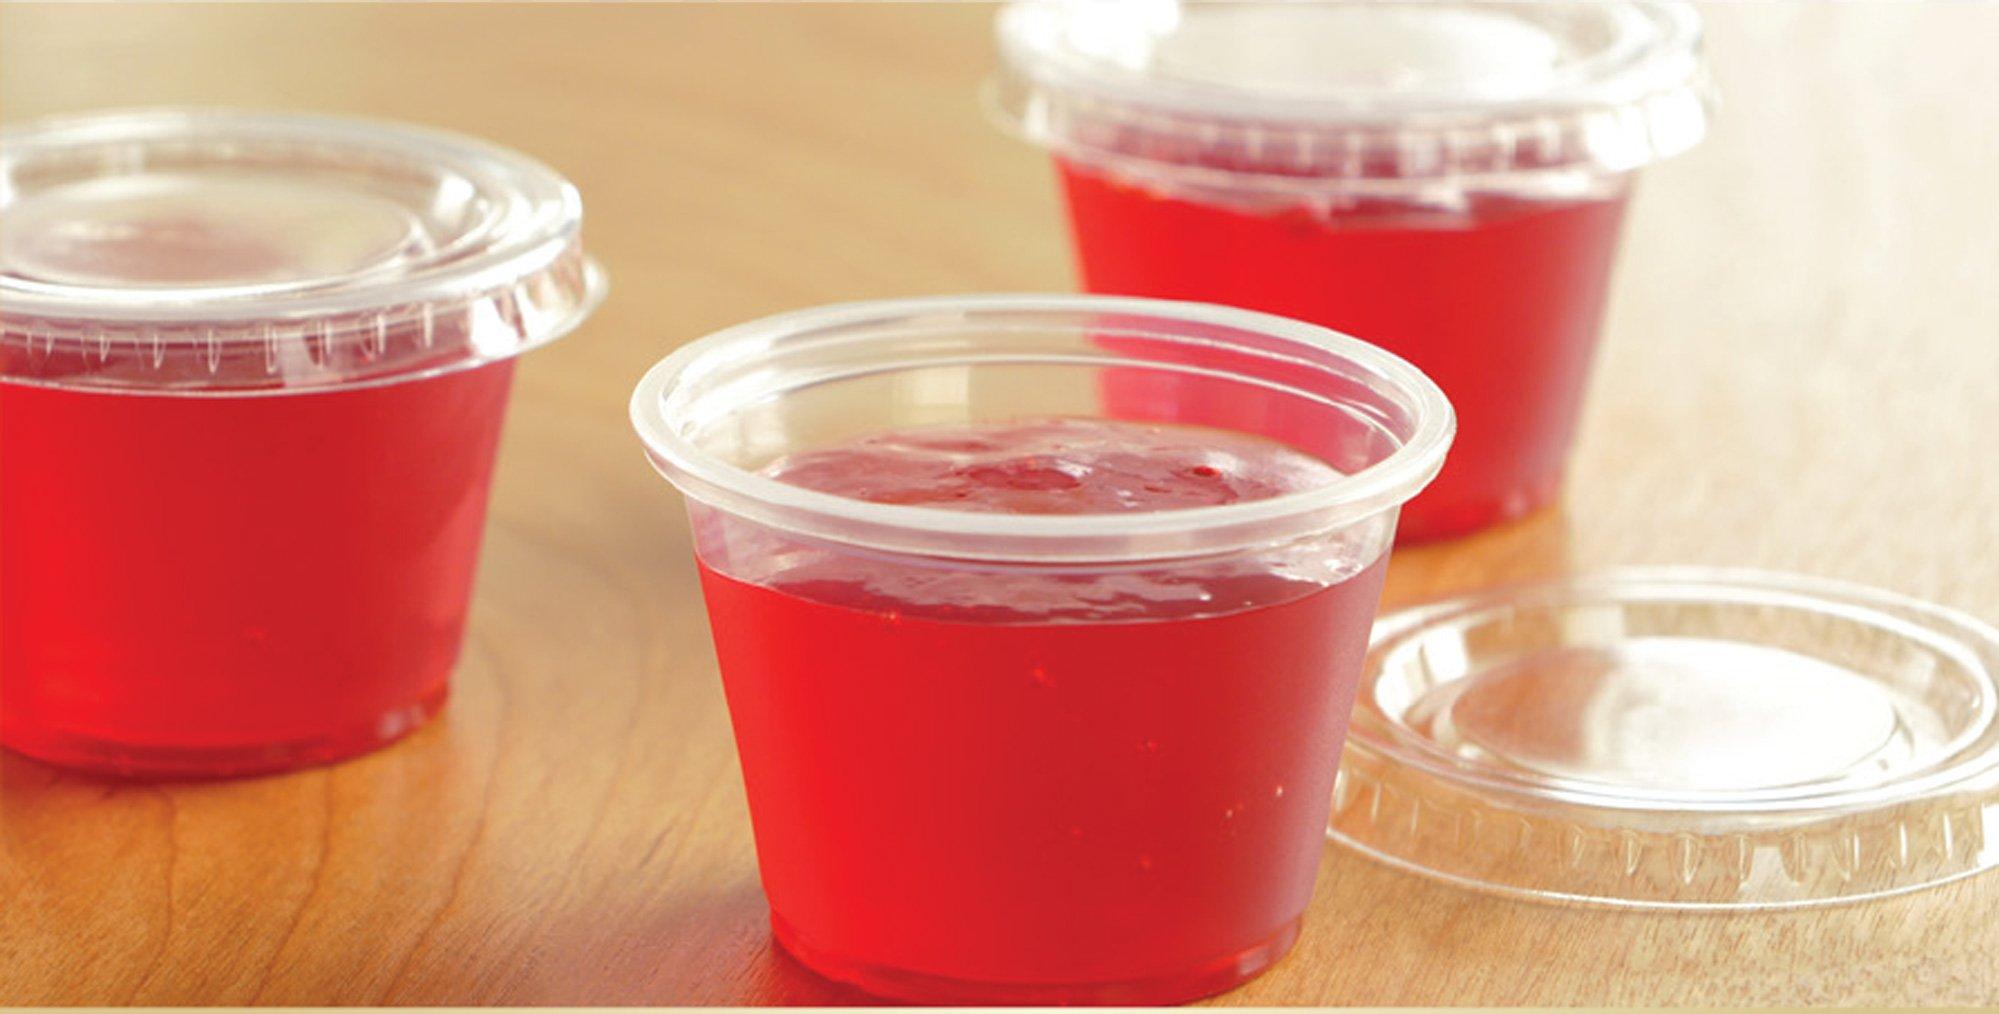 Clear Plastic Disposable Gelatin Shot Cups with Lids, 2 fl oz